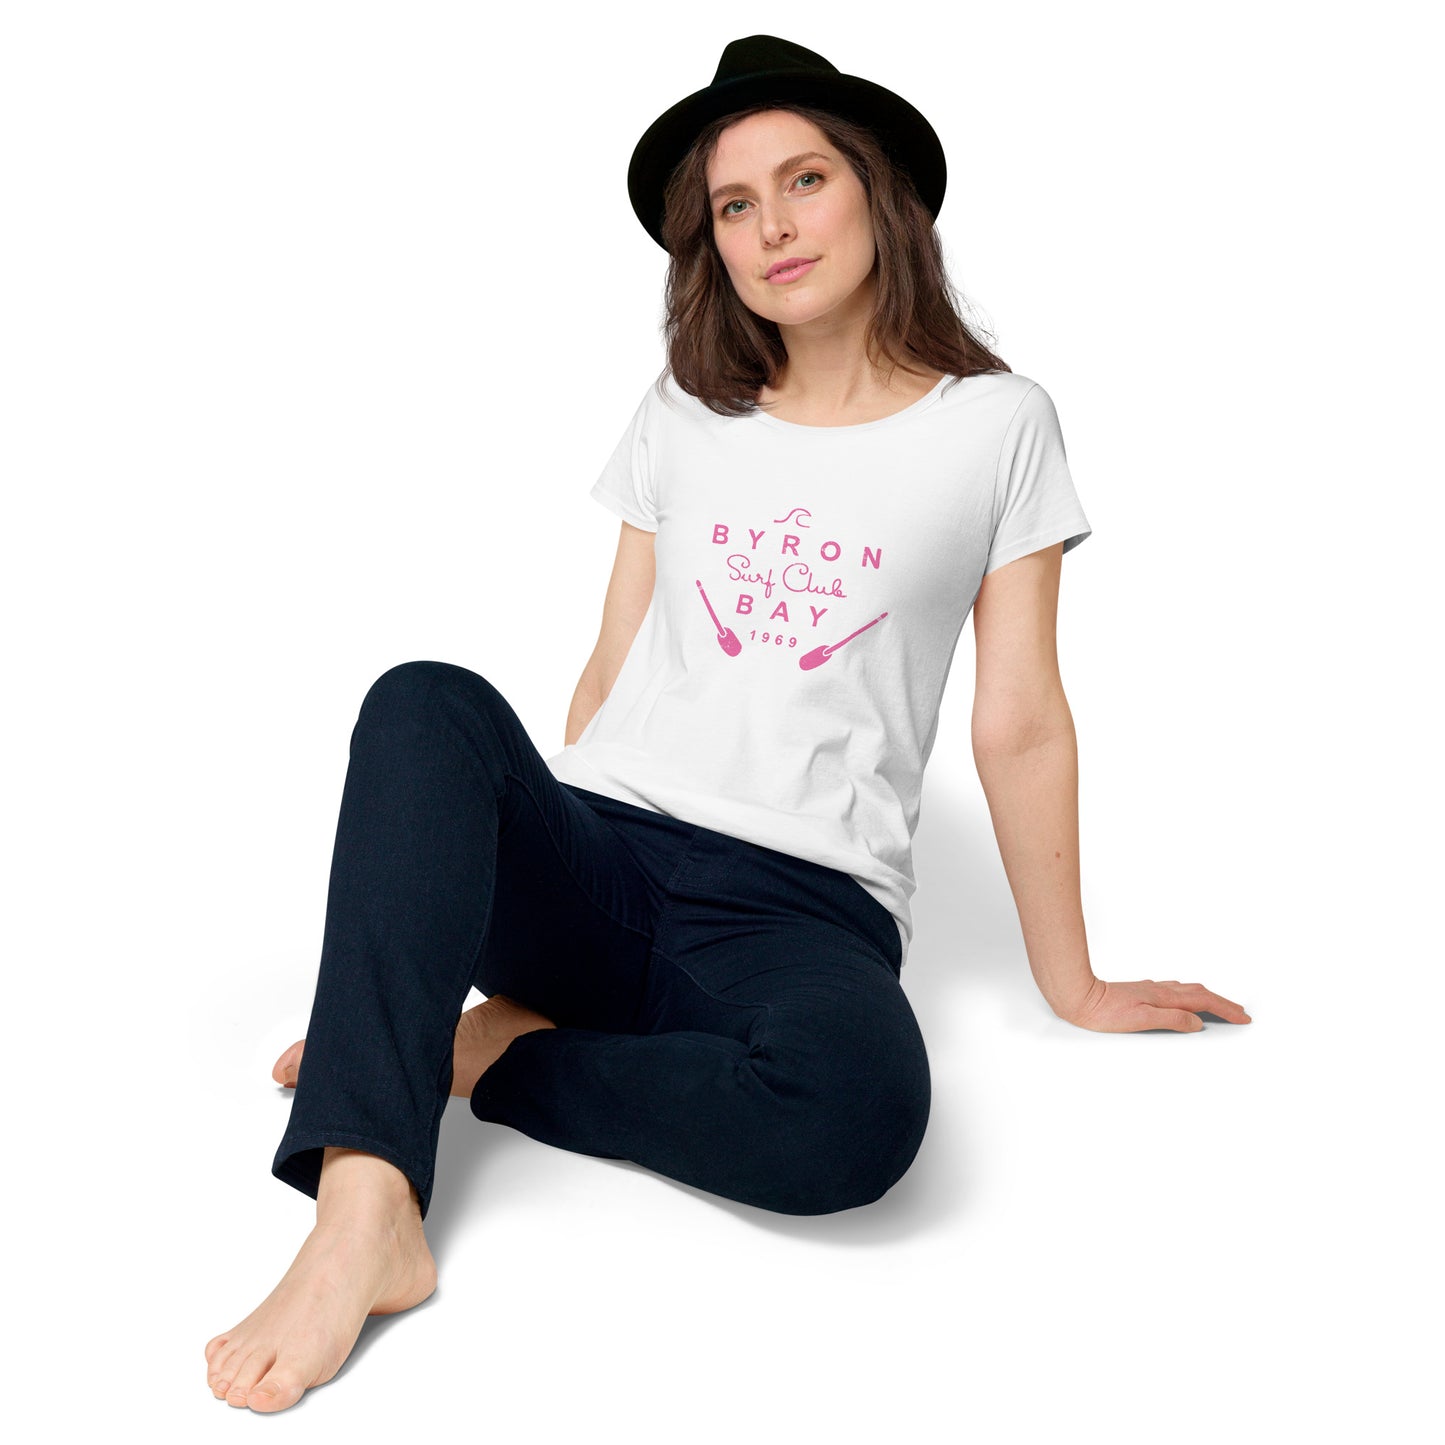  Women’s Round Neck Tee - White - Front view, woman on floor knee up resting back on her hands - pink Byron Bay Surf Club logo on front - Genuine Byron Bay Merchandise | Produced by Go Sea Kayak Byron Bay 